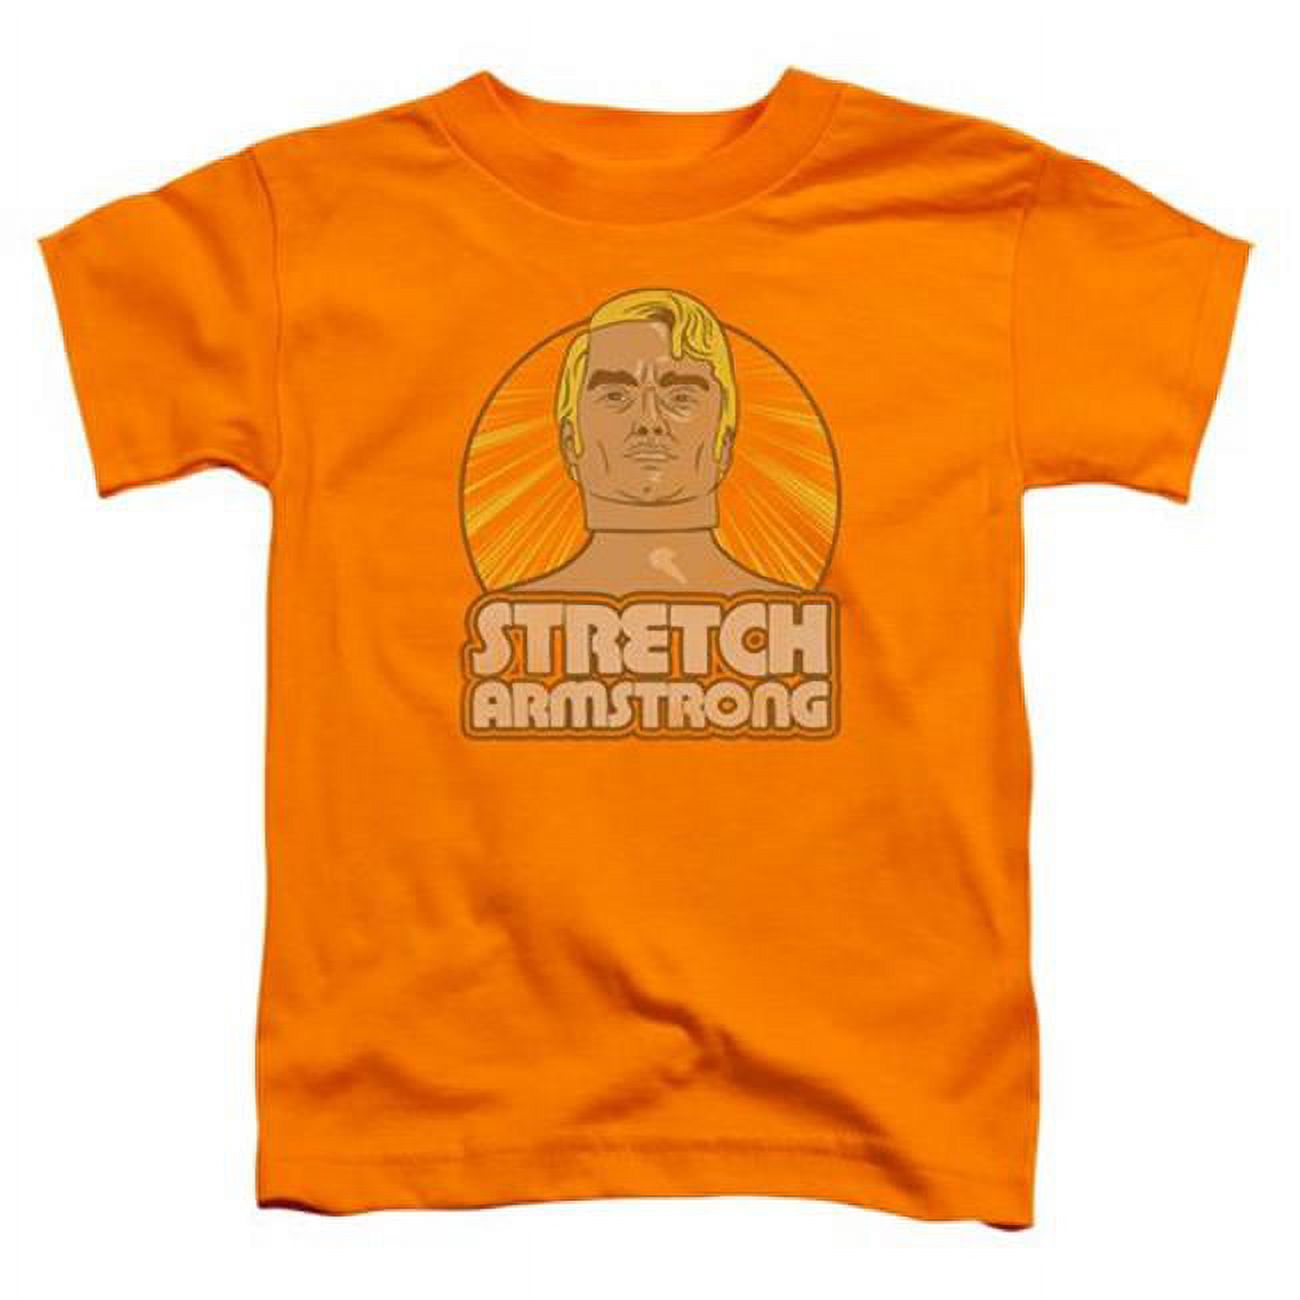 Trevco  HBRO290-TT-1 Stretch Armstrong Badge Toddler Short Sleeve T-Shirt - Orange, Small 2T - image 1 of 1